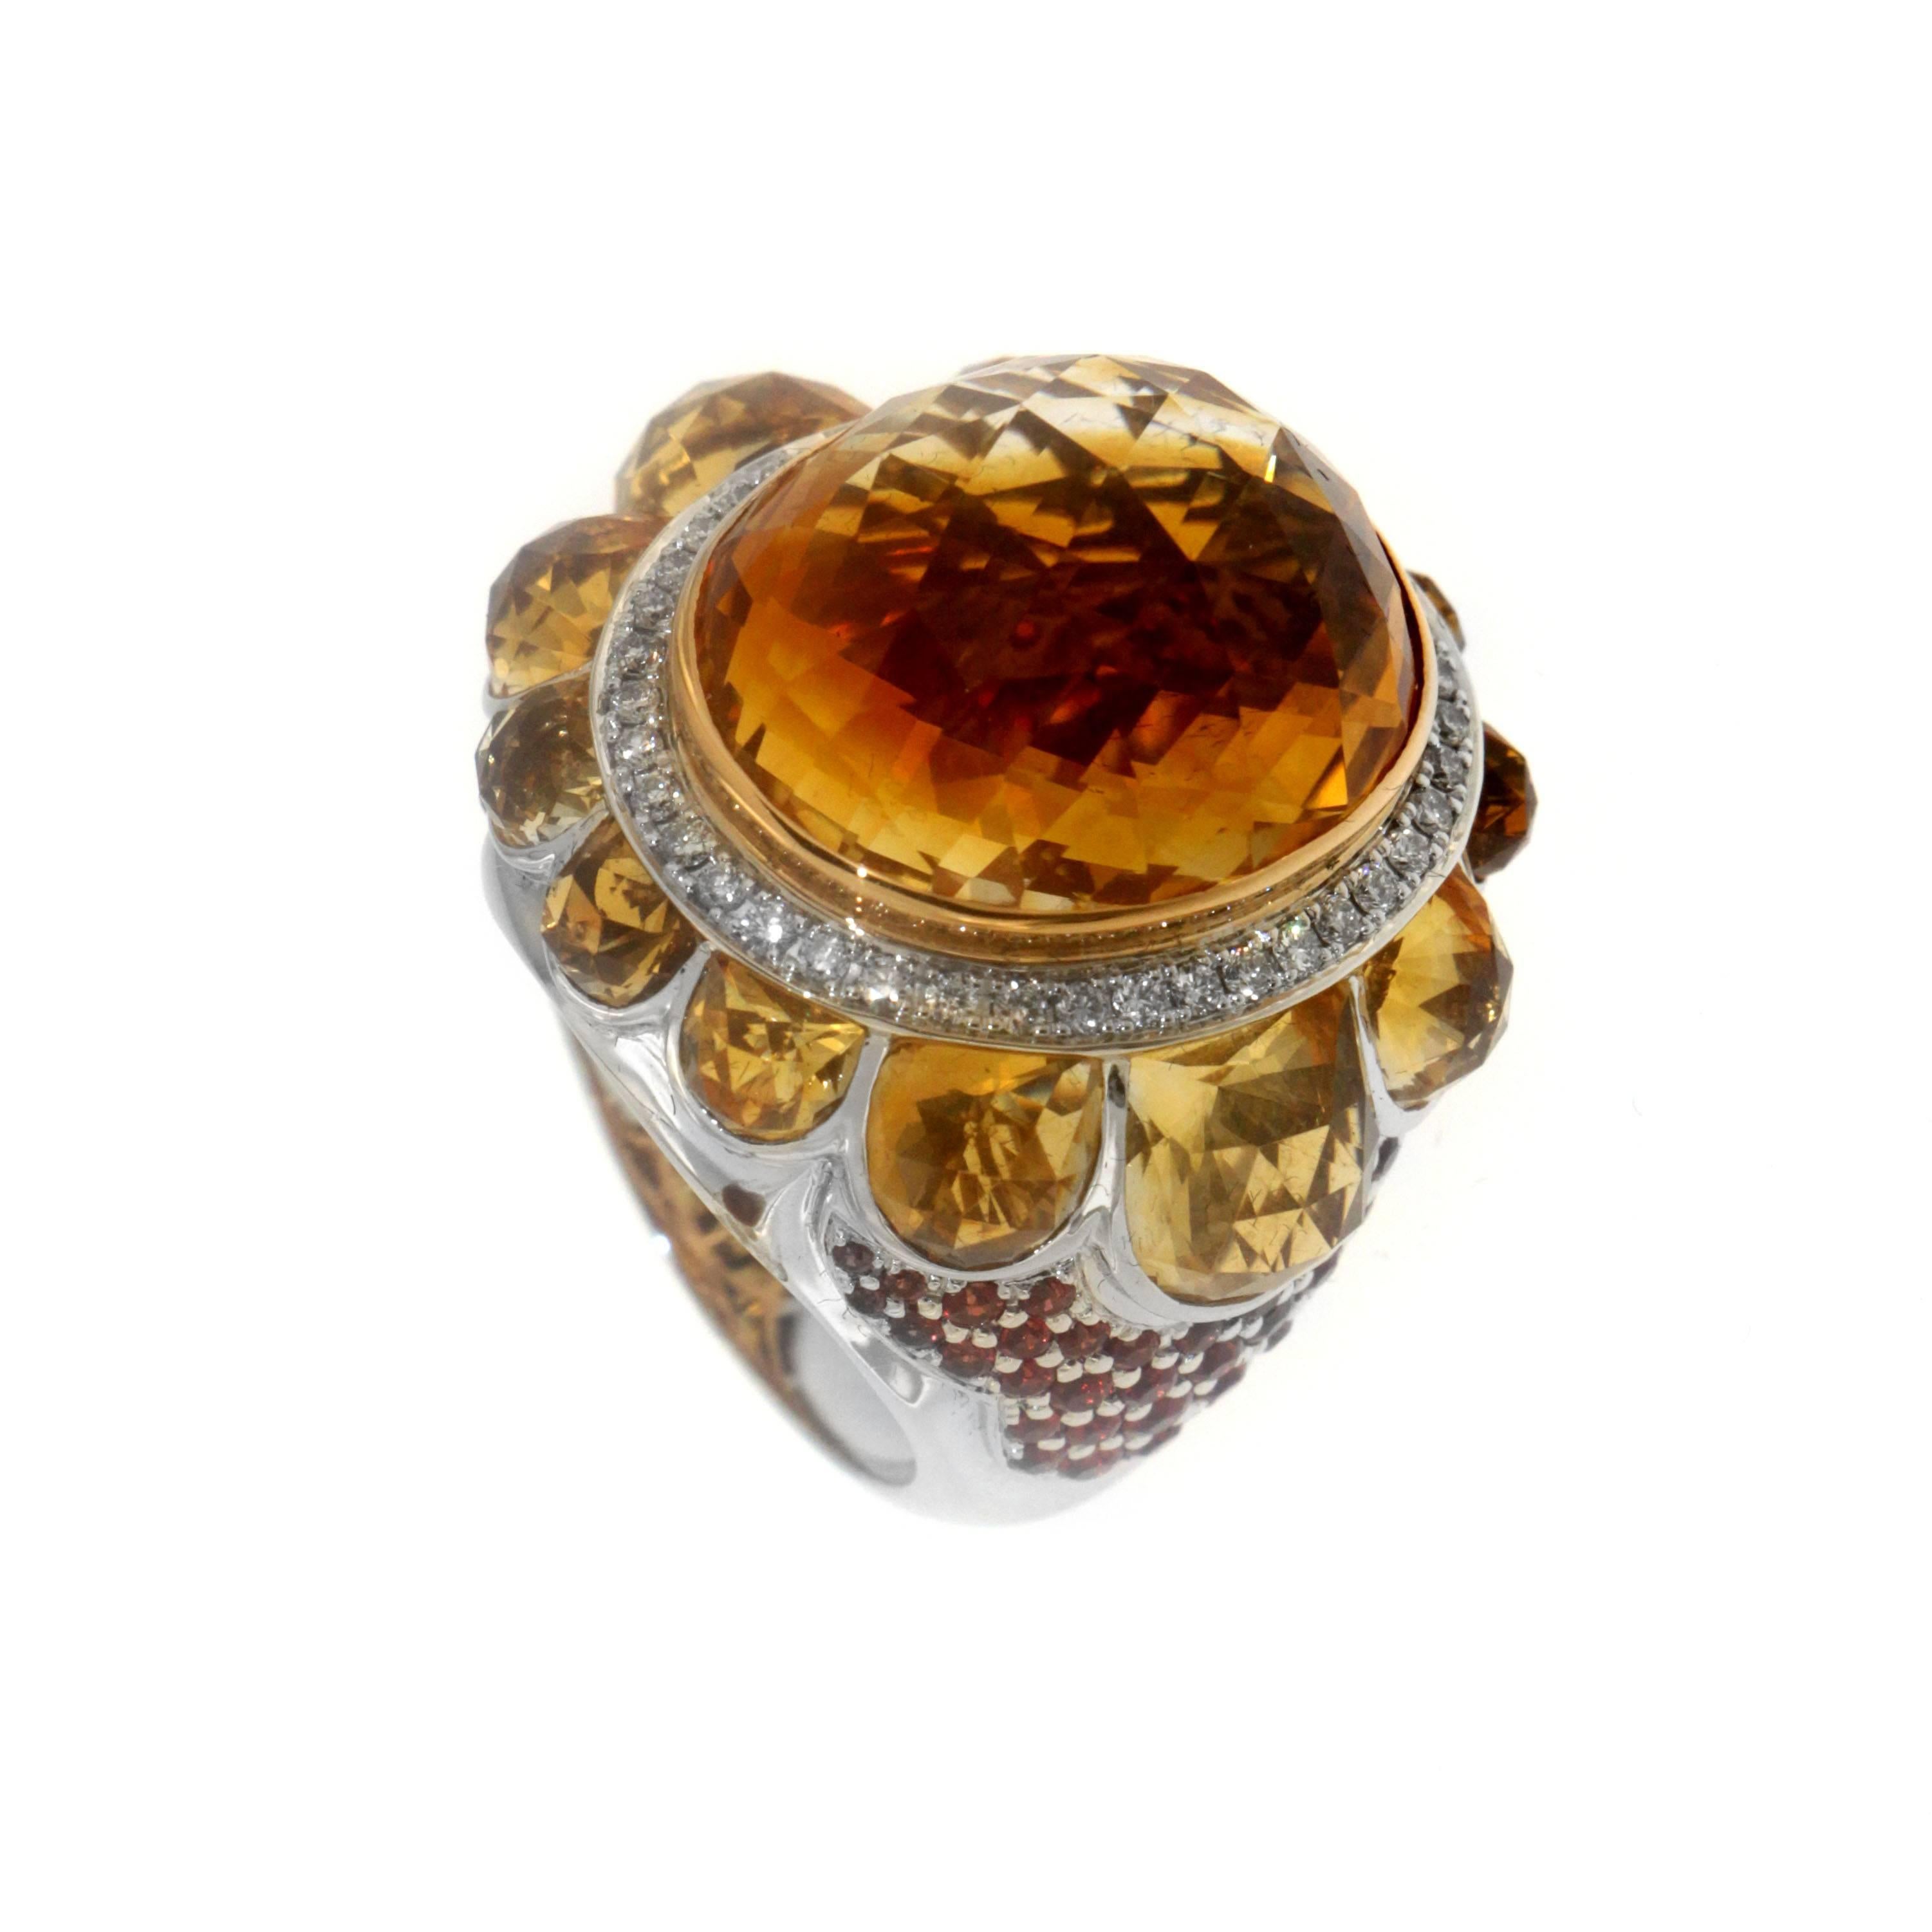 Accessorize with glamor and share you verve with Zorab's 32.49 Carat Citrine Quartz Cocktail Ring. The Center Stone is set in 18 Karat Gold and surrounded by 0.40 carats of white diamonds. Citrine Quartz stones encircle the bombe centerpiece, while